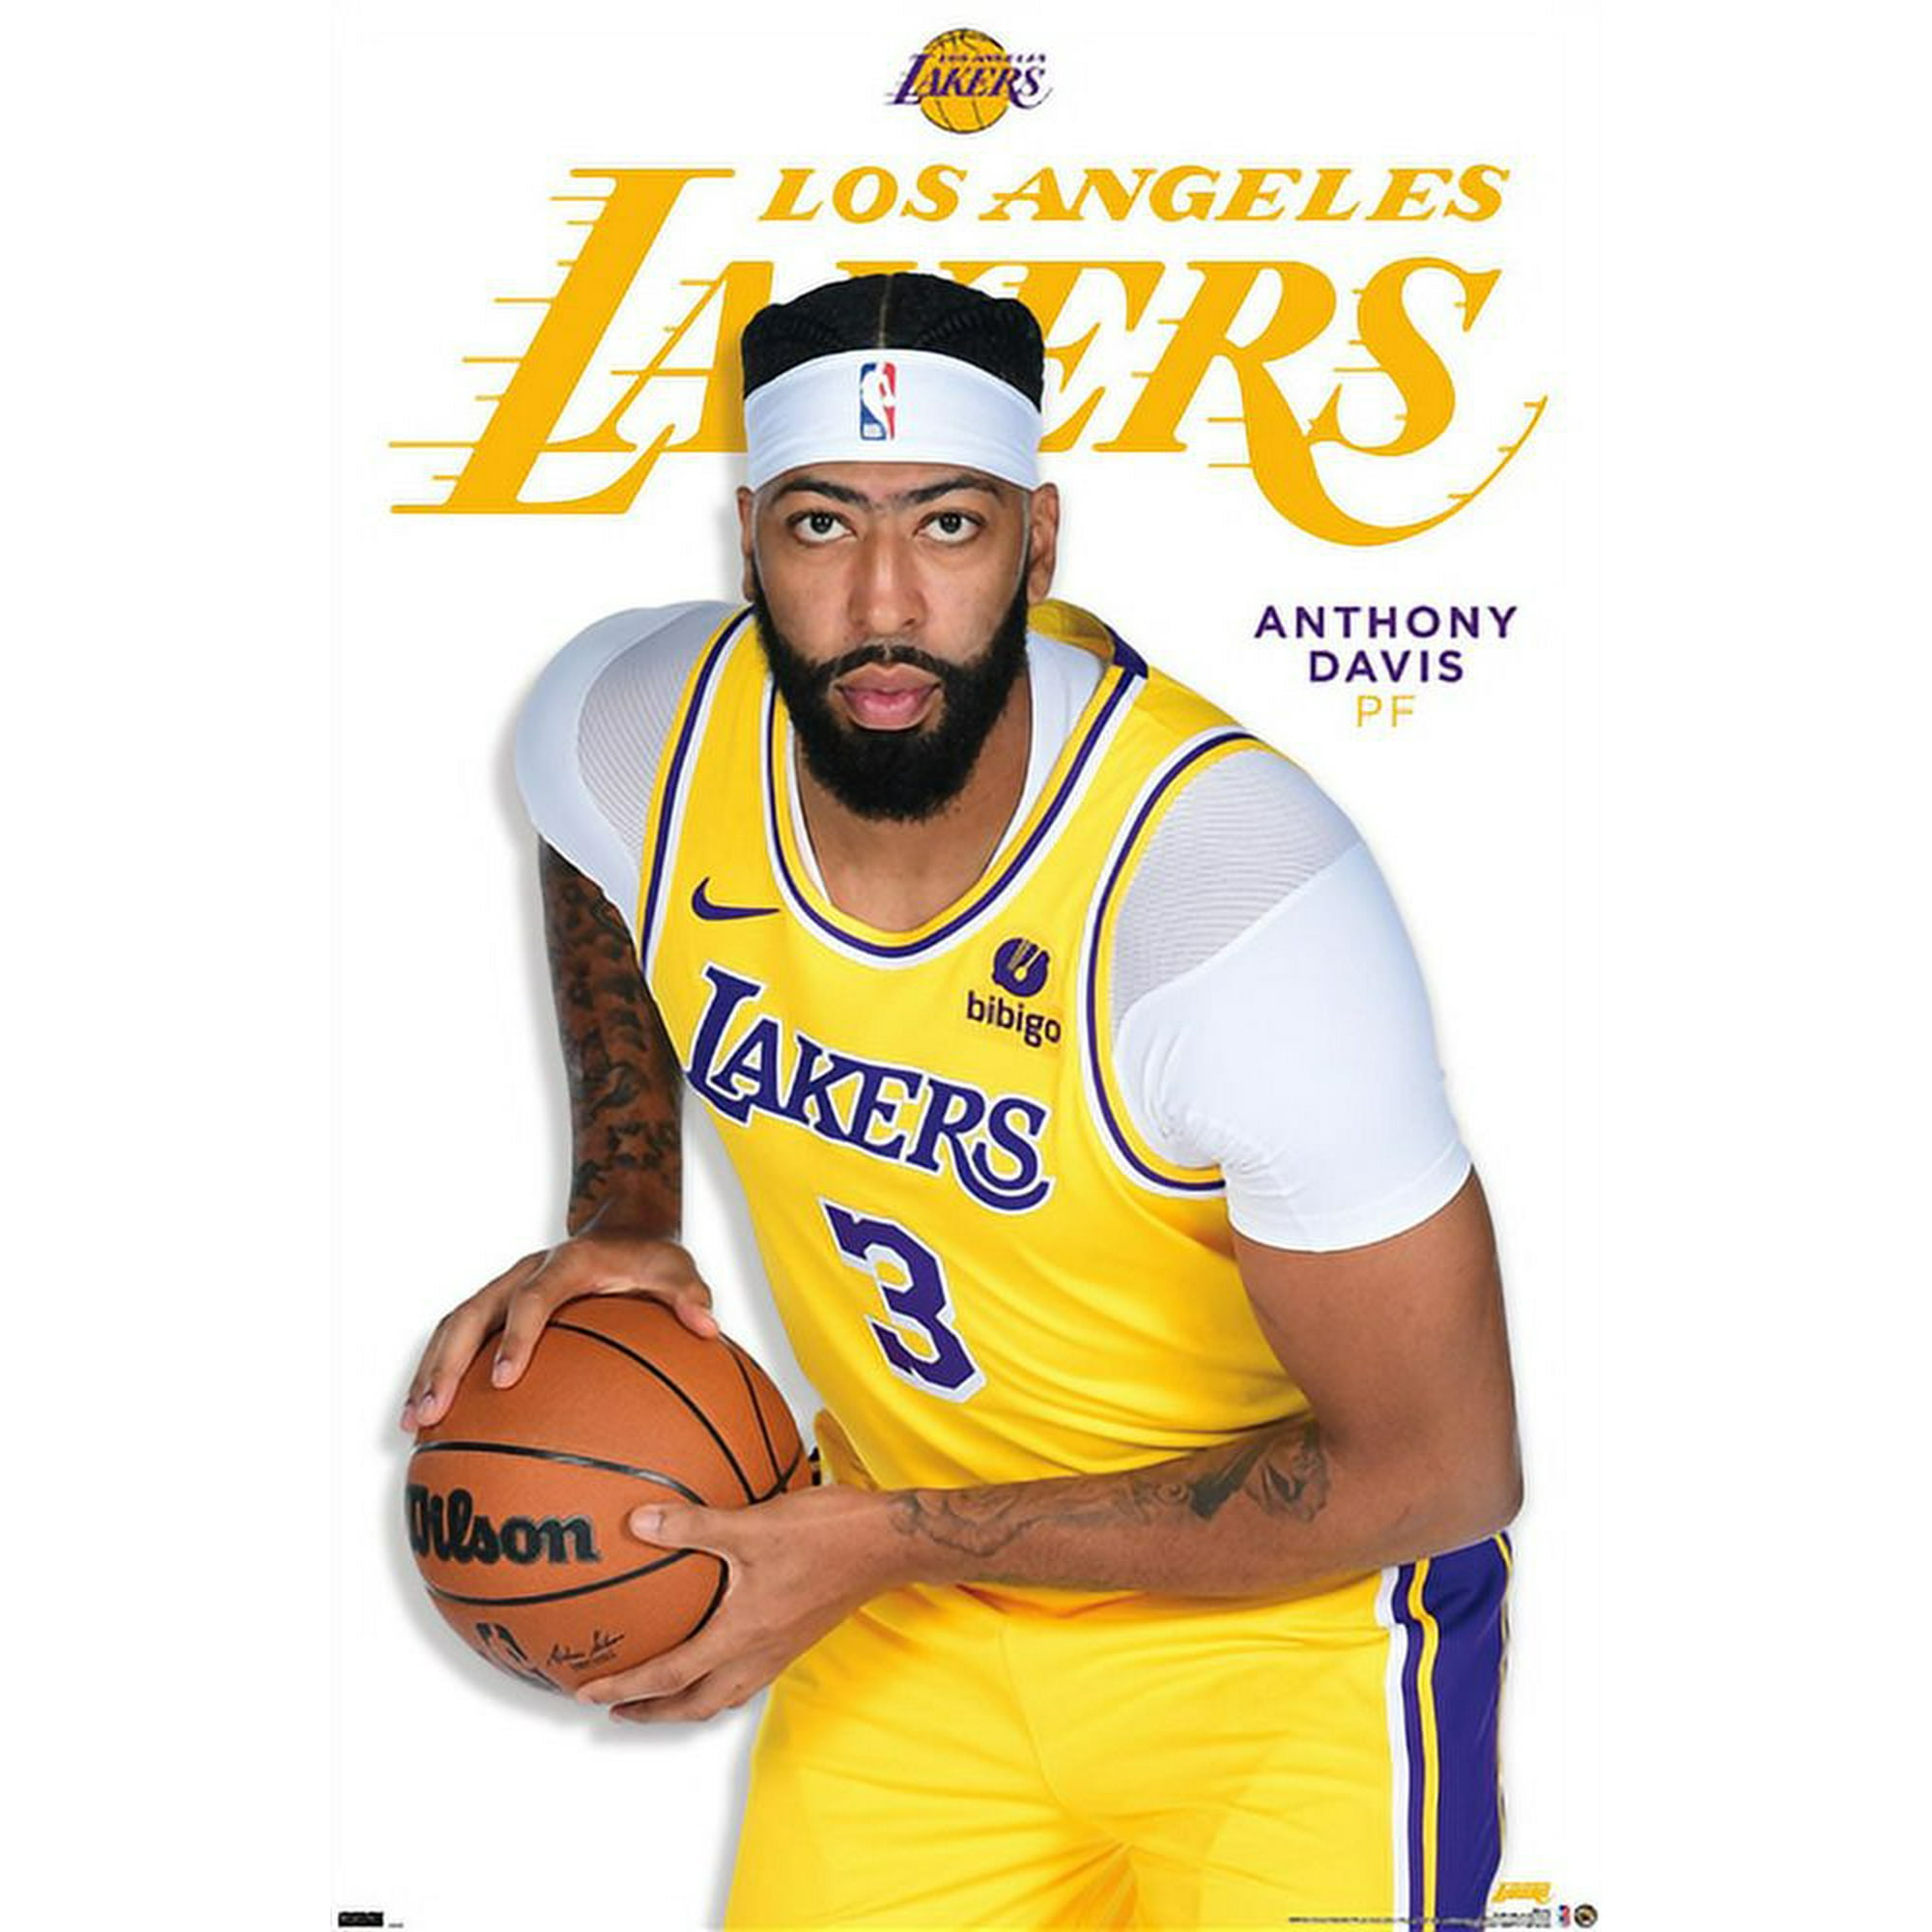 Los angeles lakers players, Lakers, Basketball design